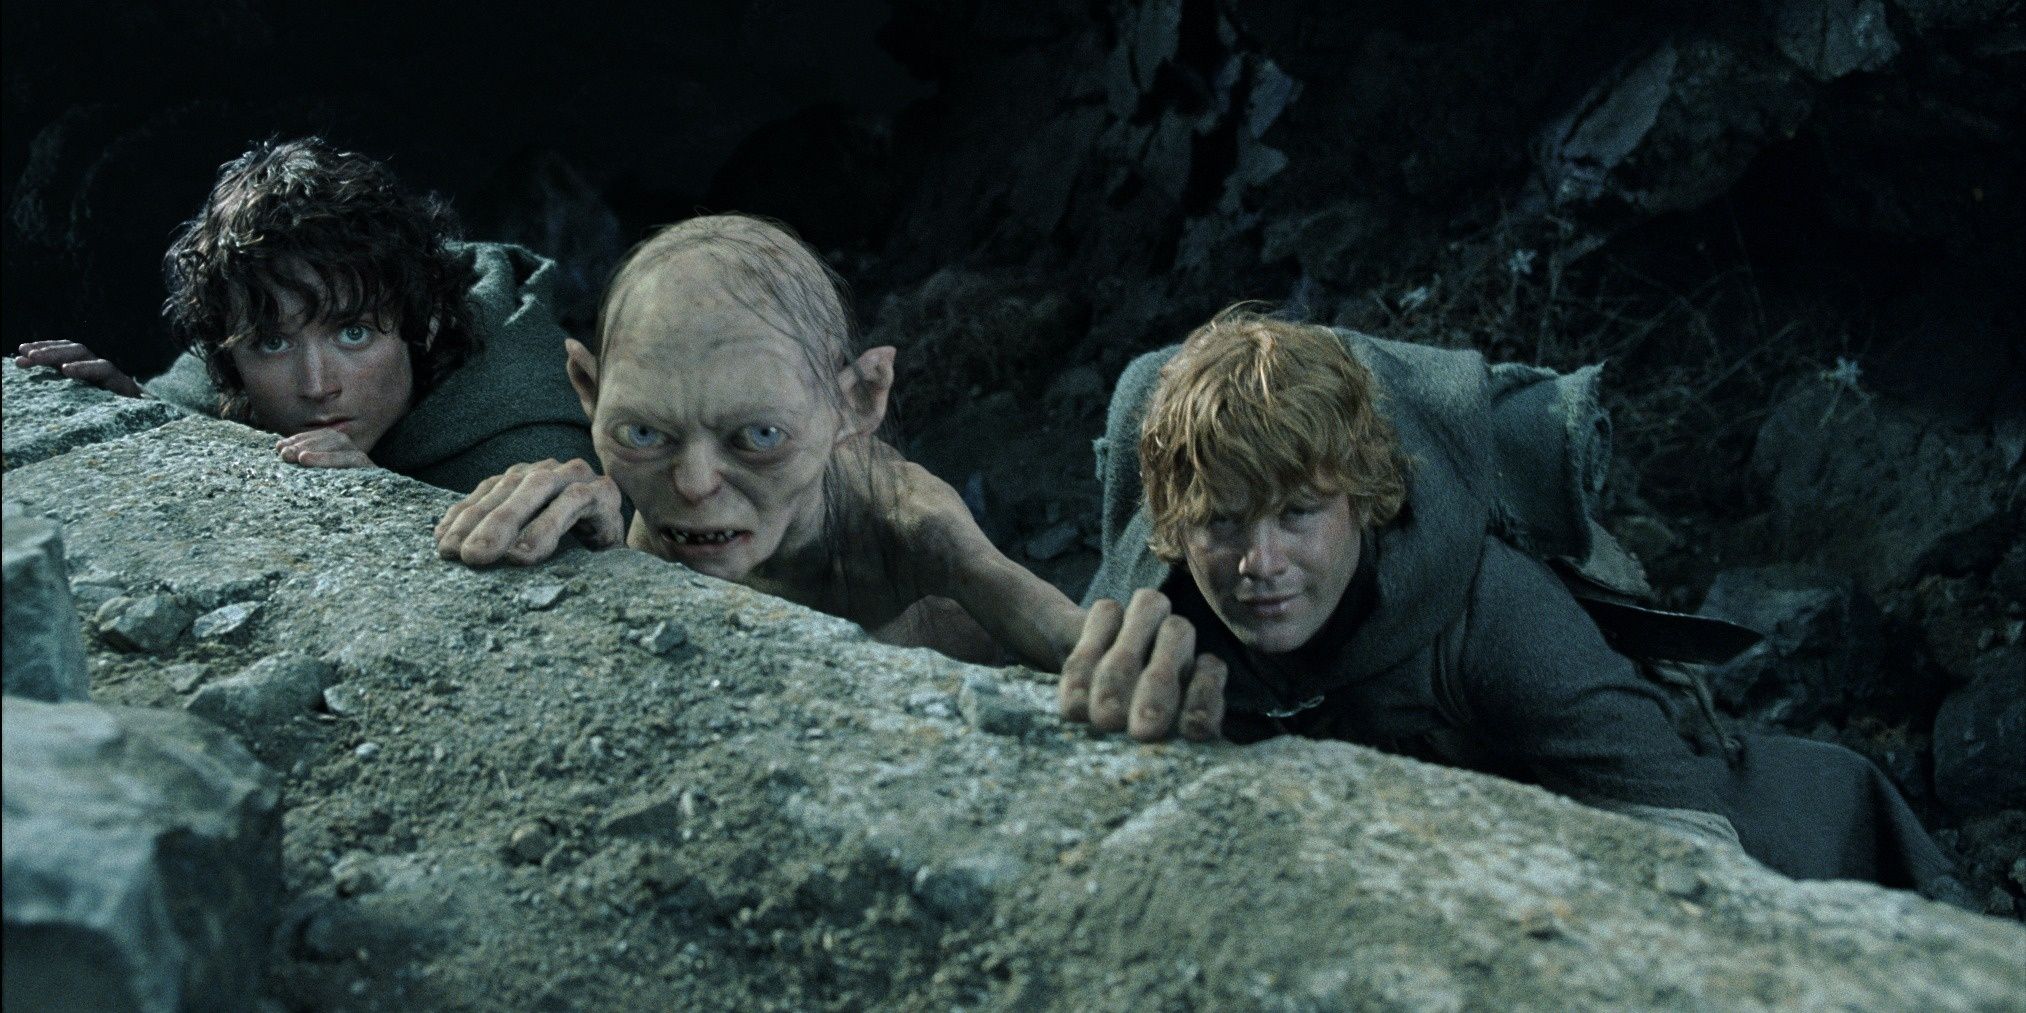 Frodo, Gollum and Sam looking on